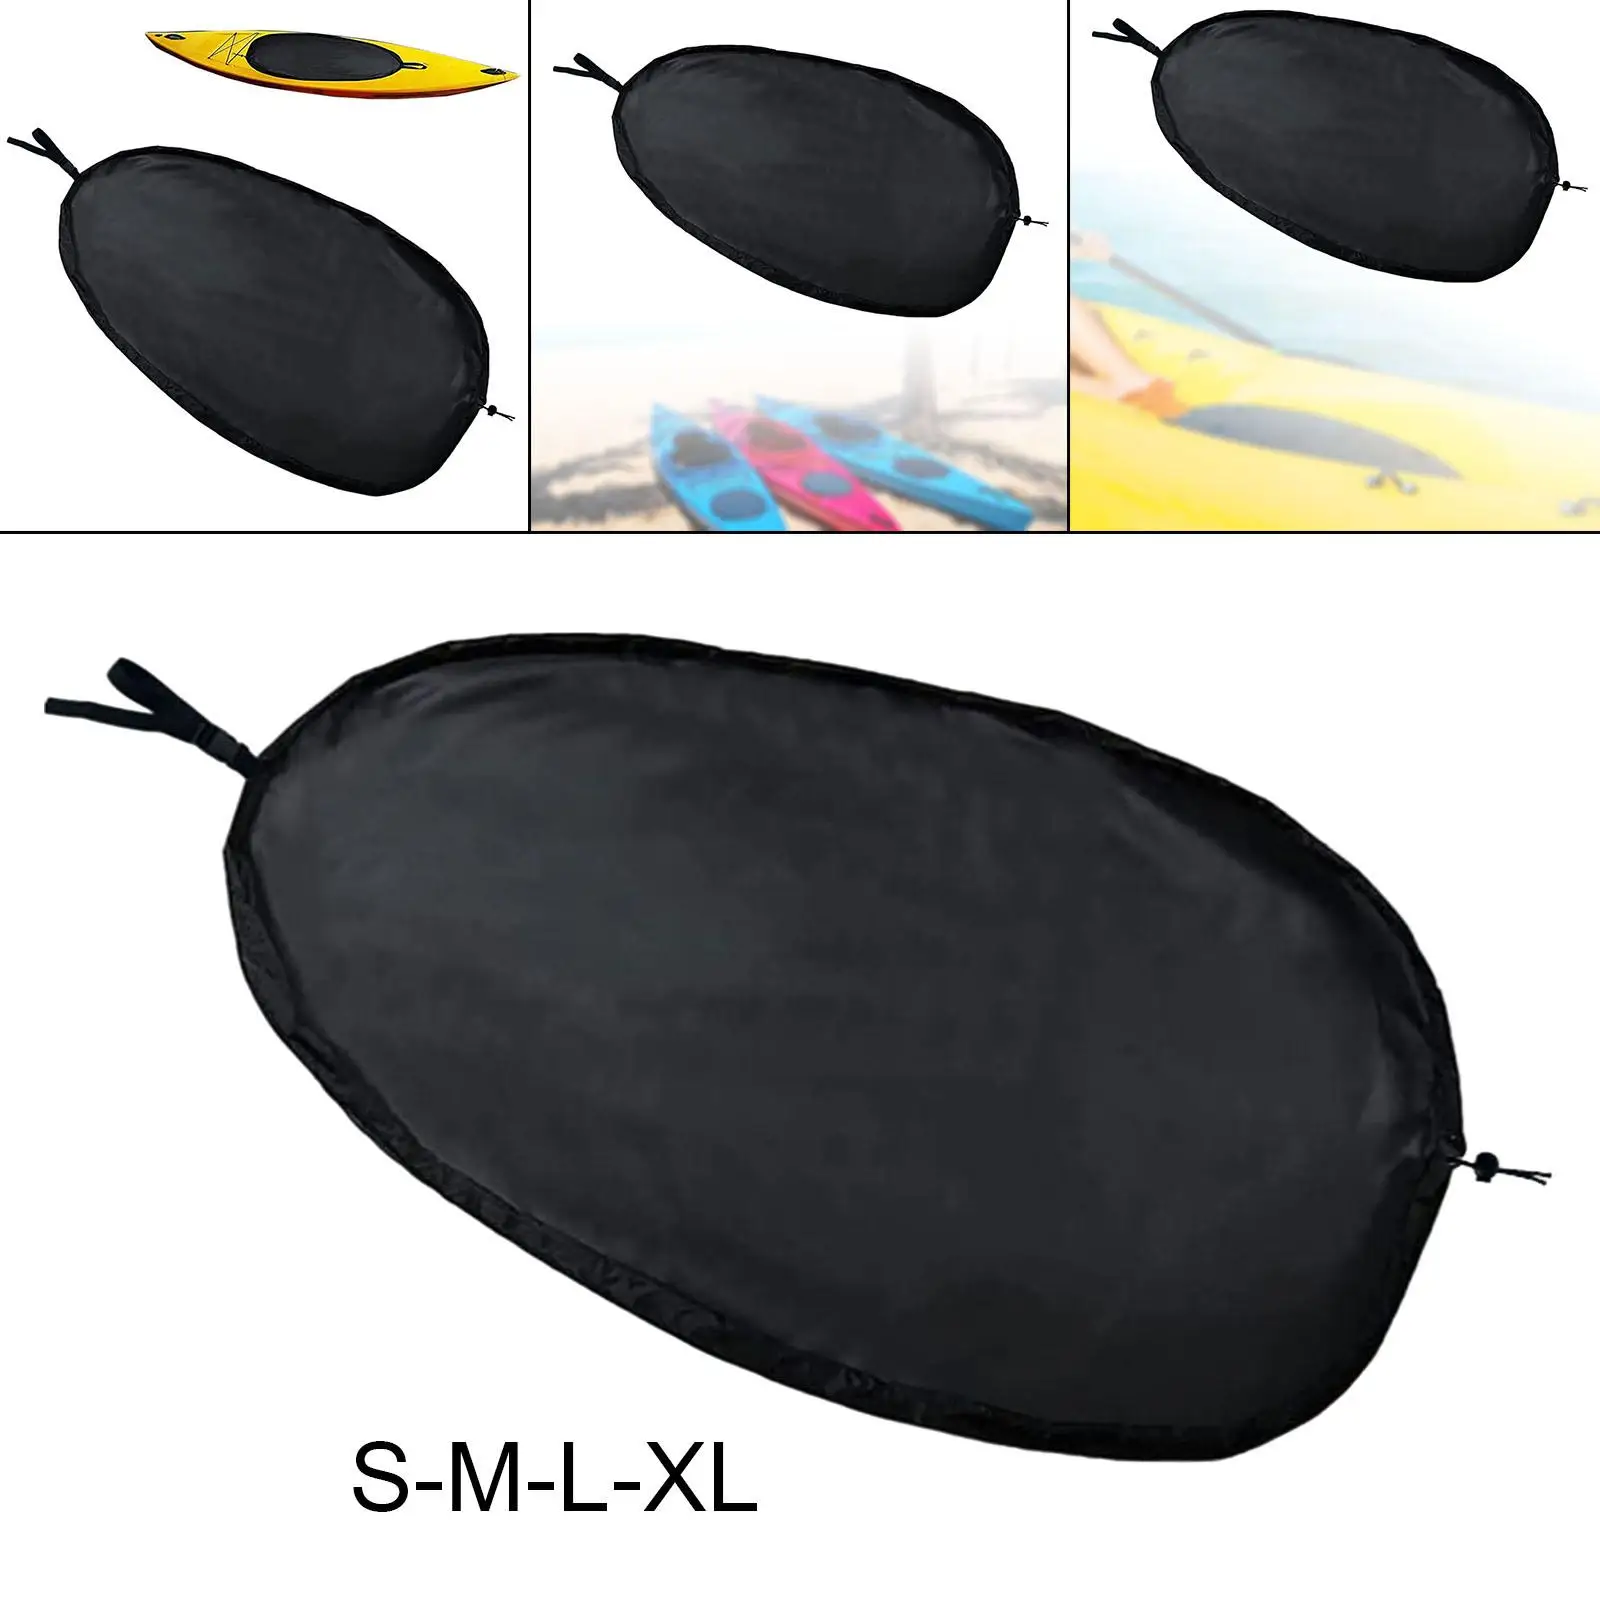 Portable Kayak Cockpit Cover Waterproof Breathable Oxford Cloth Sun Protection